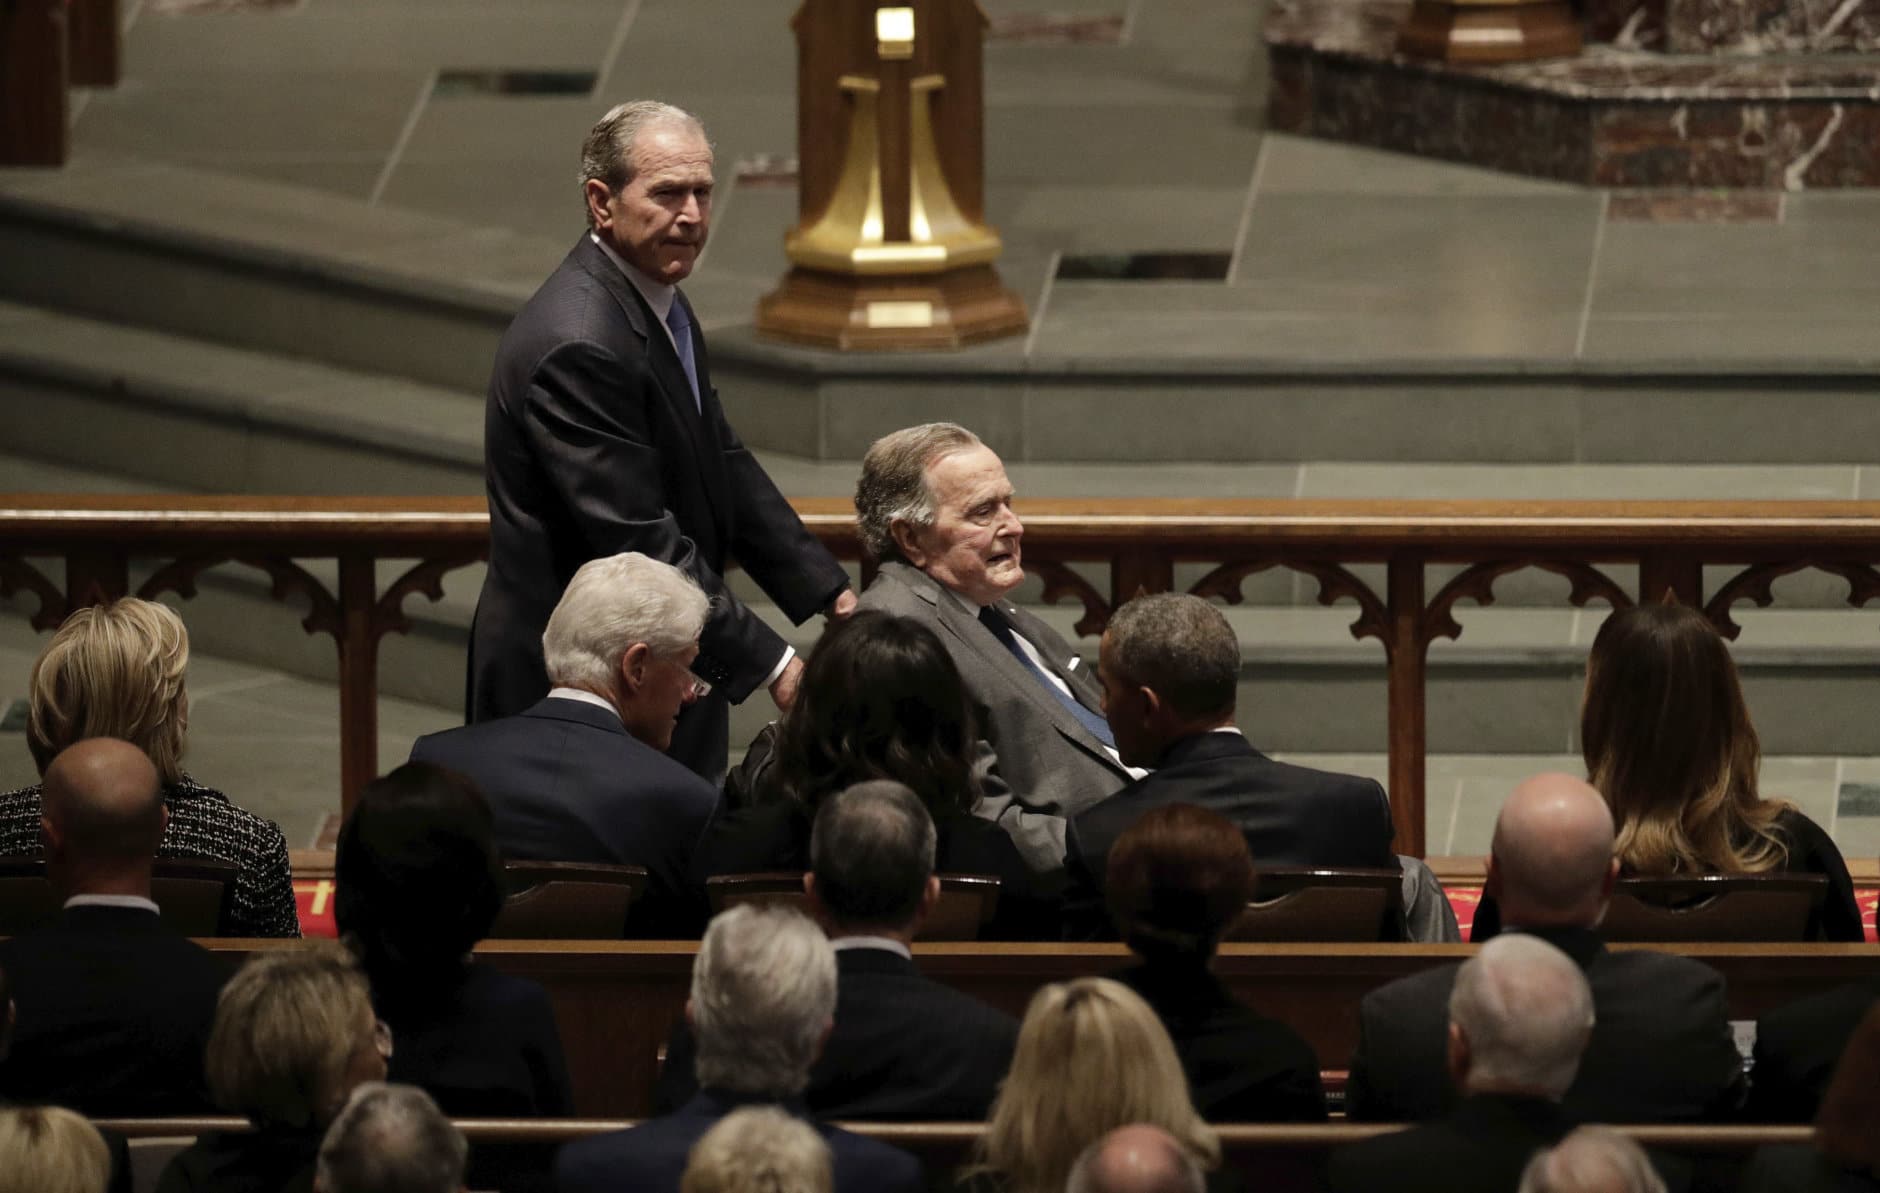 Former Presidents George W. Bush and George H.W. Bush arrive at St. Martin's Episcopal Church in Houston for the funeral for former first lady Barbara Bush on April 21, 2018. Seated in the front row, from left, are former first lady Hillary Clinton, former President Bill Clinton, former first lady Michelle Obama, former President Barack Obama and first lady Melania Trump. (AP Photo/David J. Phillip)